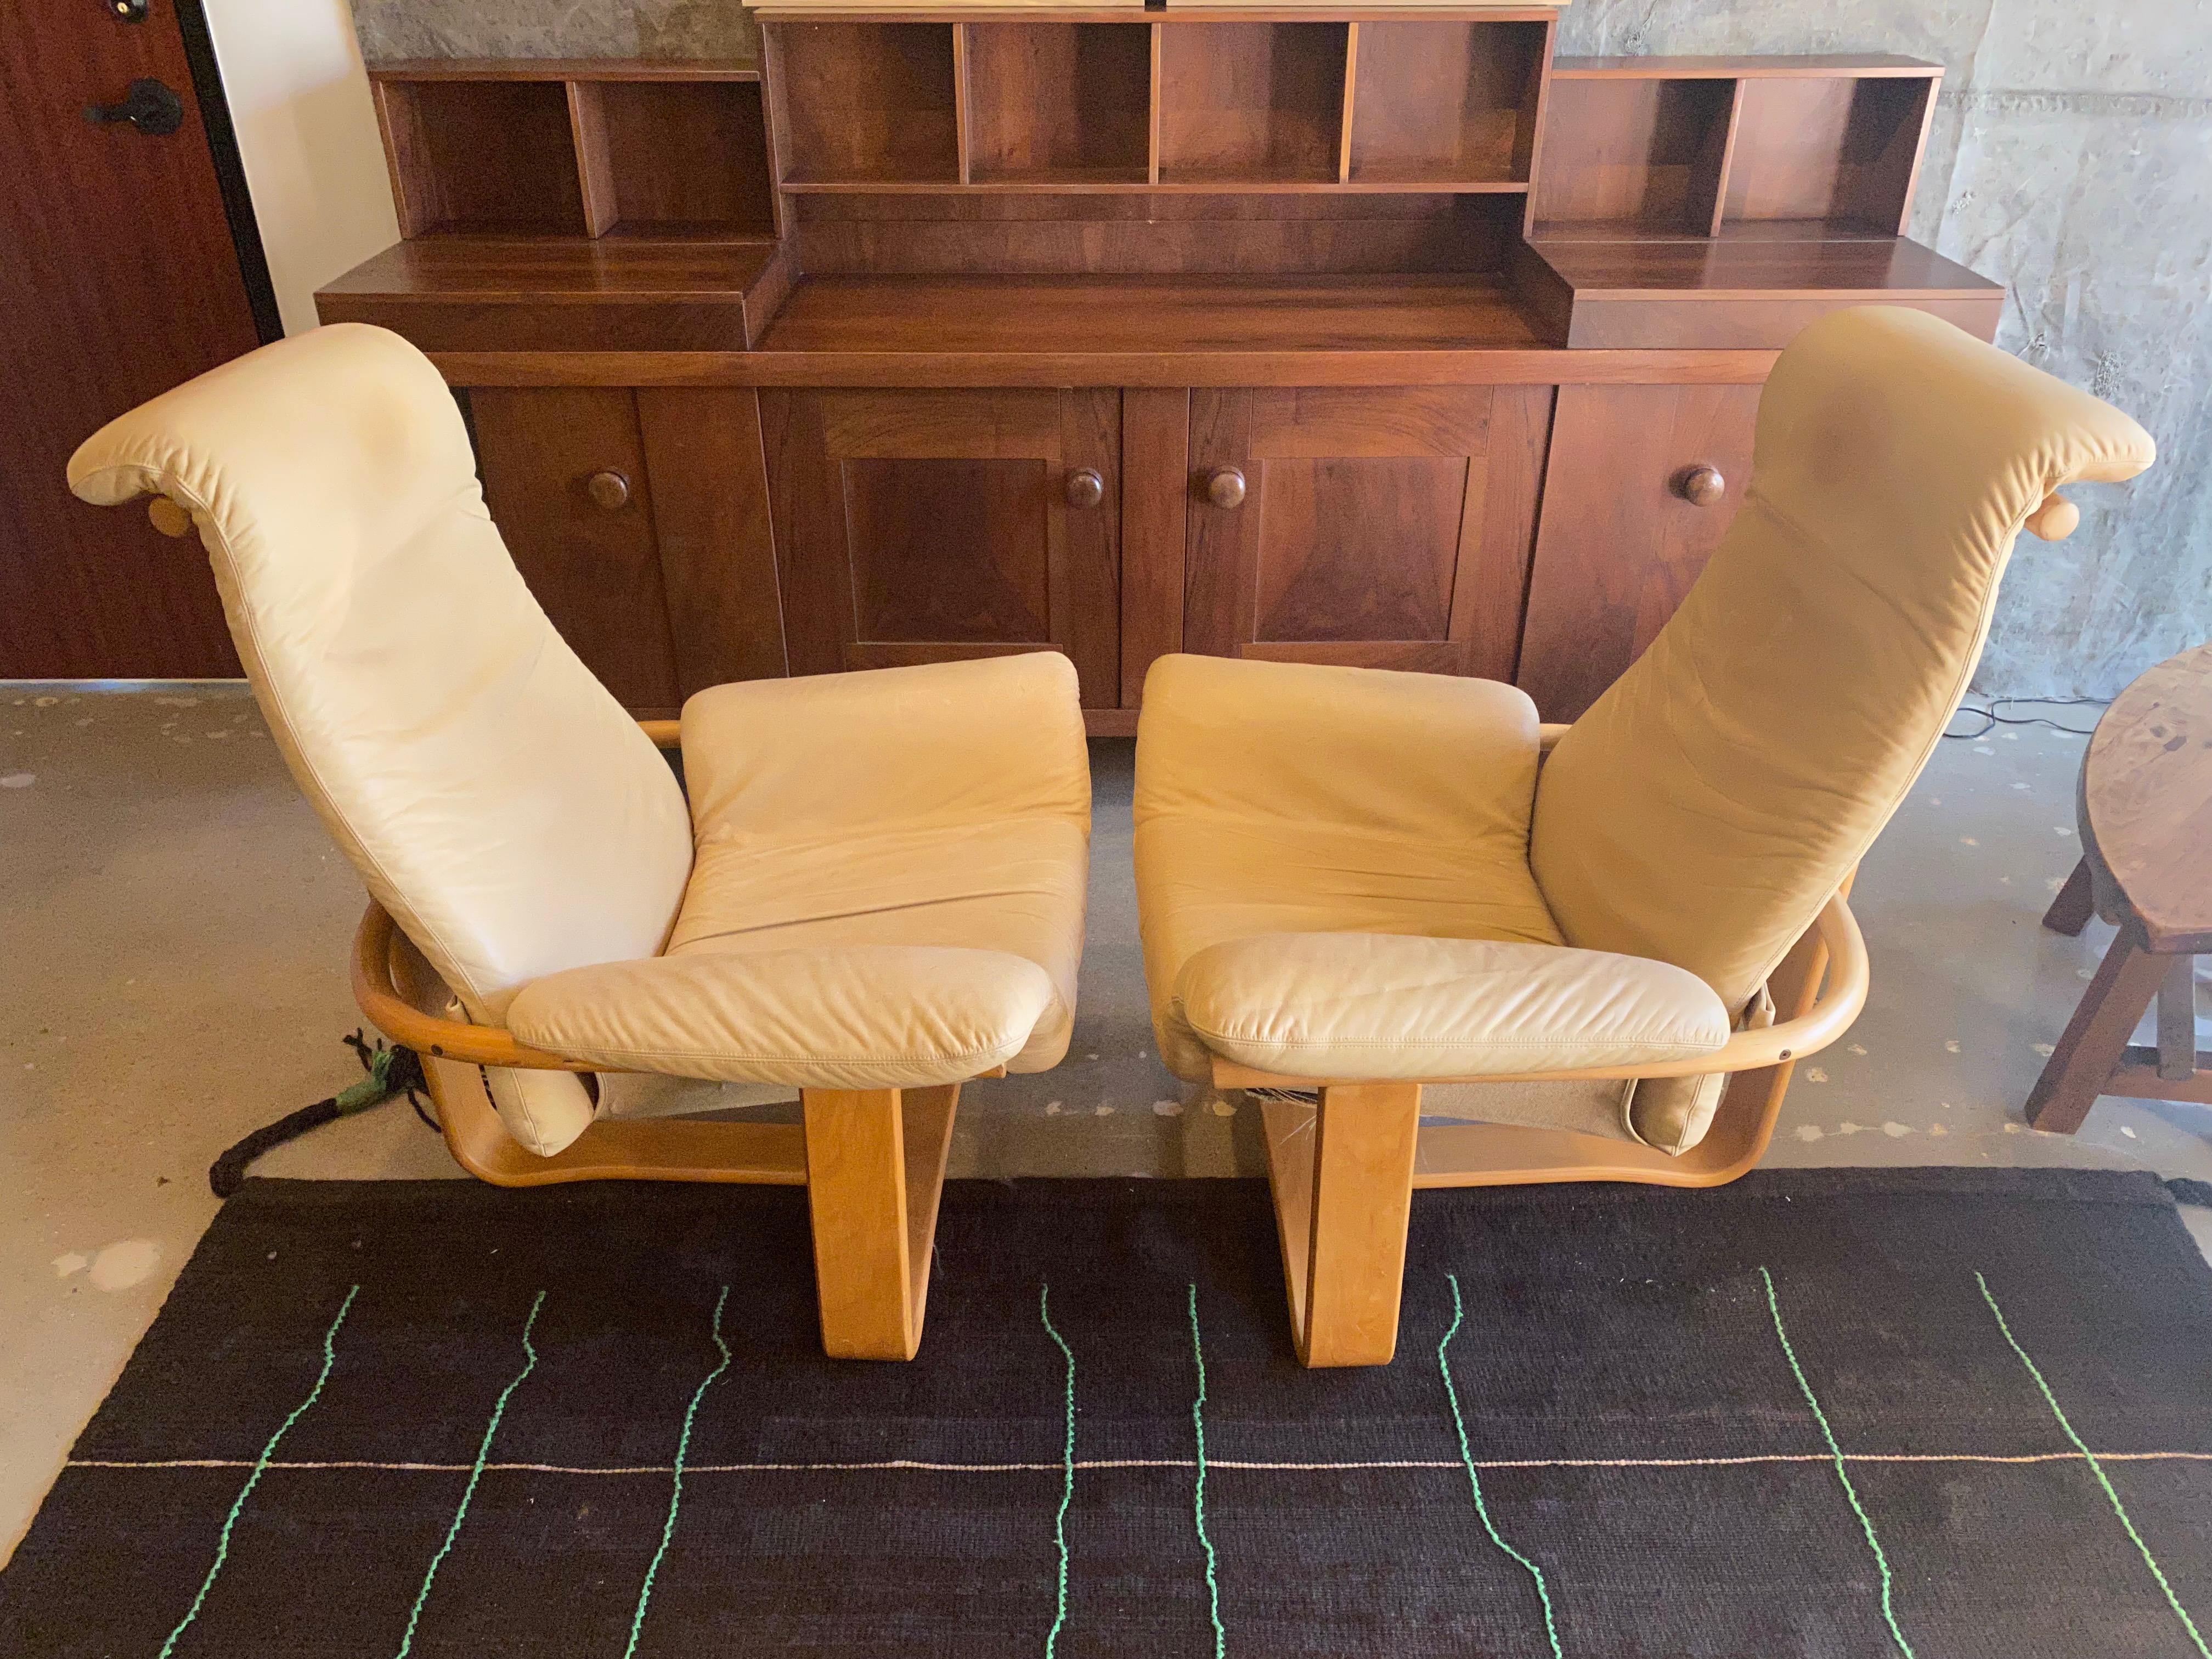 Pair of high style Scandinavian modern lounge chairs with beech wood frames and buff leather (aniline dyed) cushions. A uniquely sculptural pair of mid-century modern seats that are as comfortable as they are stylish.  